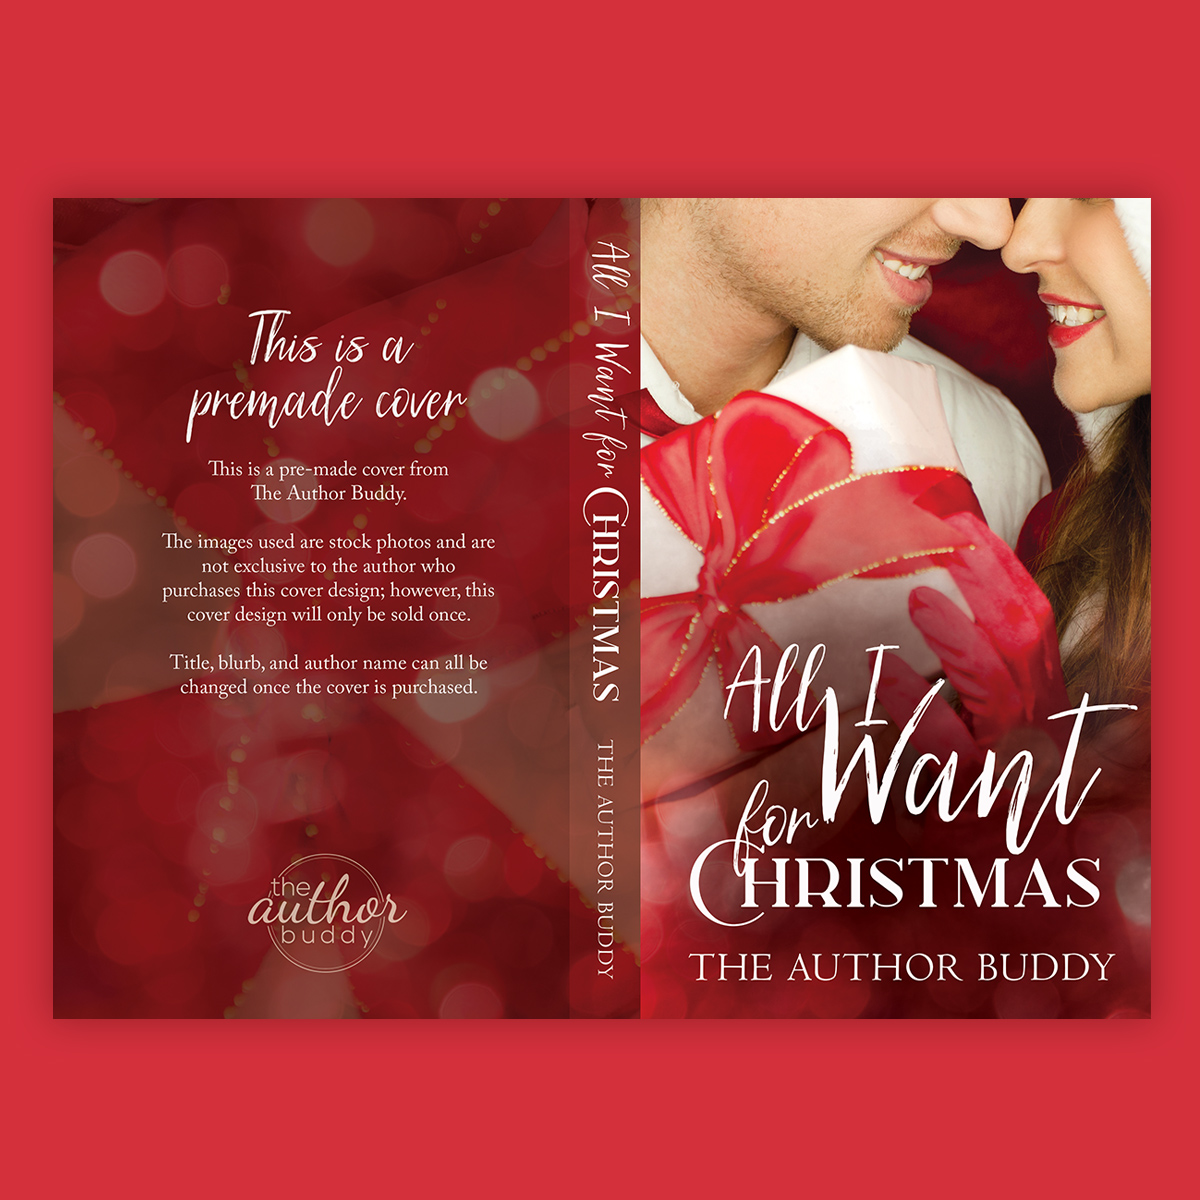 All I Want for Christmas - Premade Goliday Book Cover from The Author Buddy